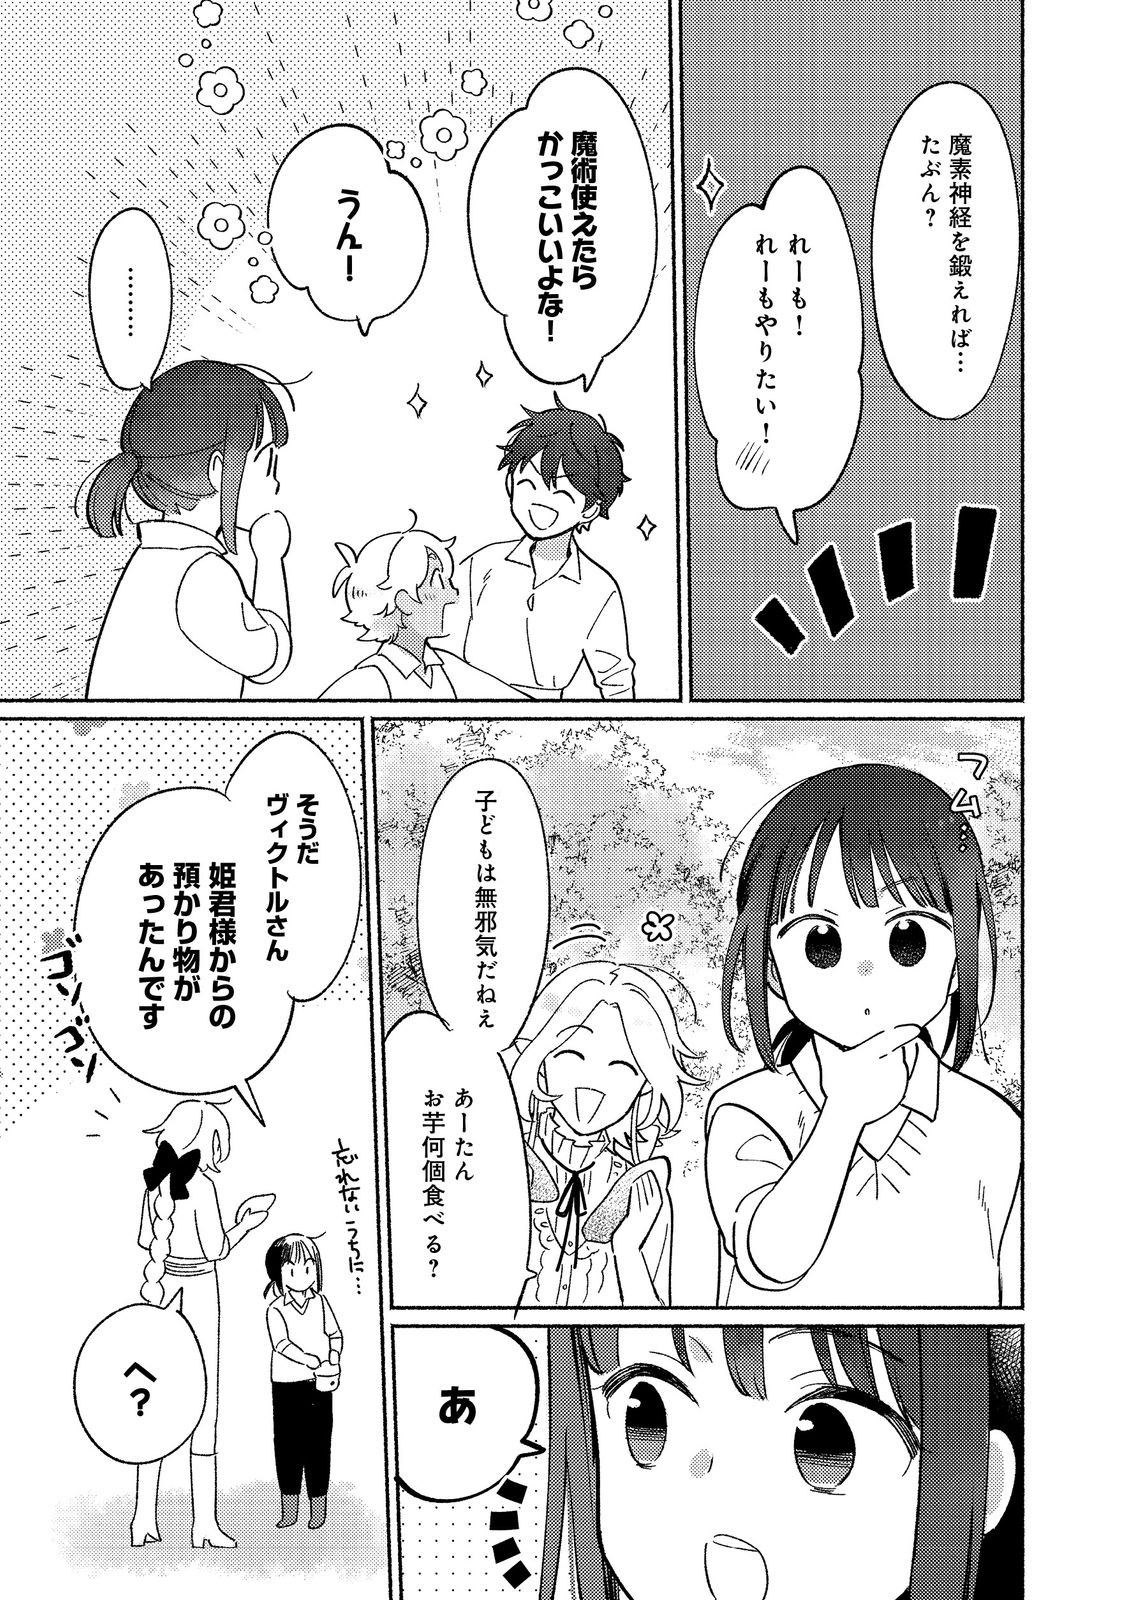 I’m the White Pig Nobleman 第18.2話 - Page 10